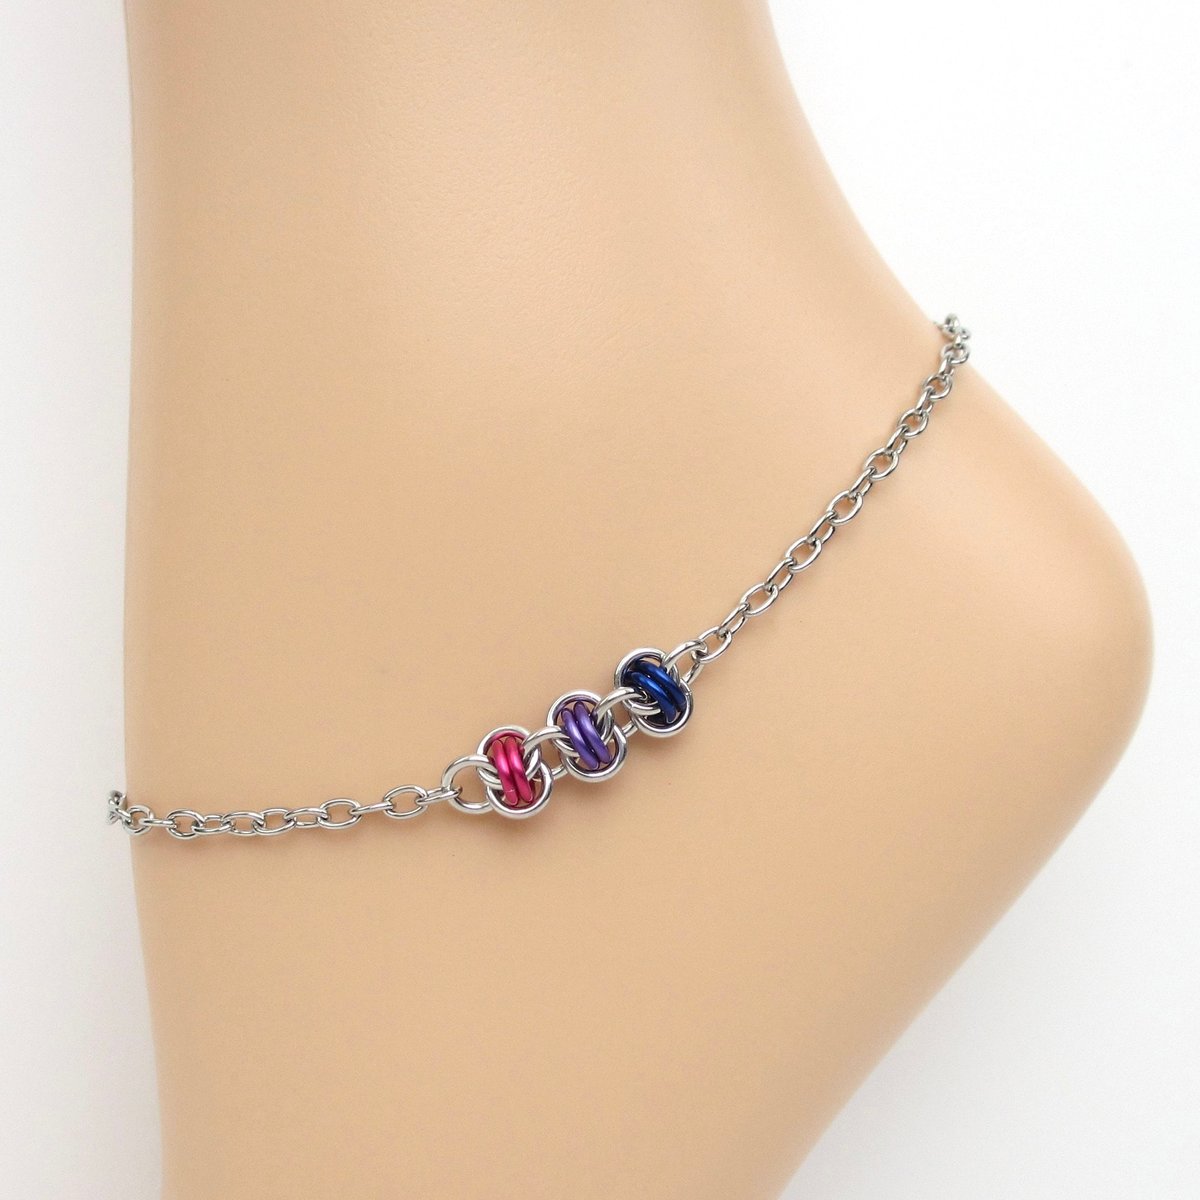 Bi pride anklet, chainmail barrel weave, subtle bisexual jewelry gifts